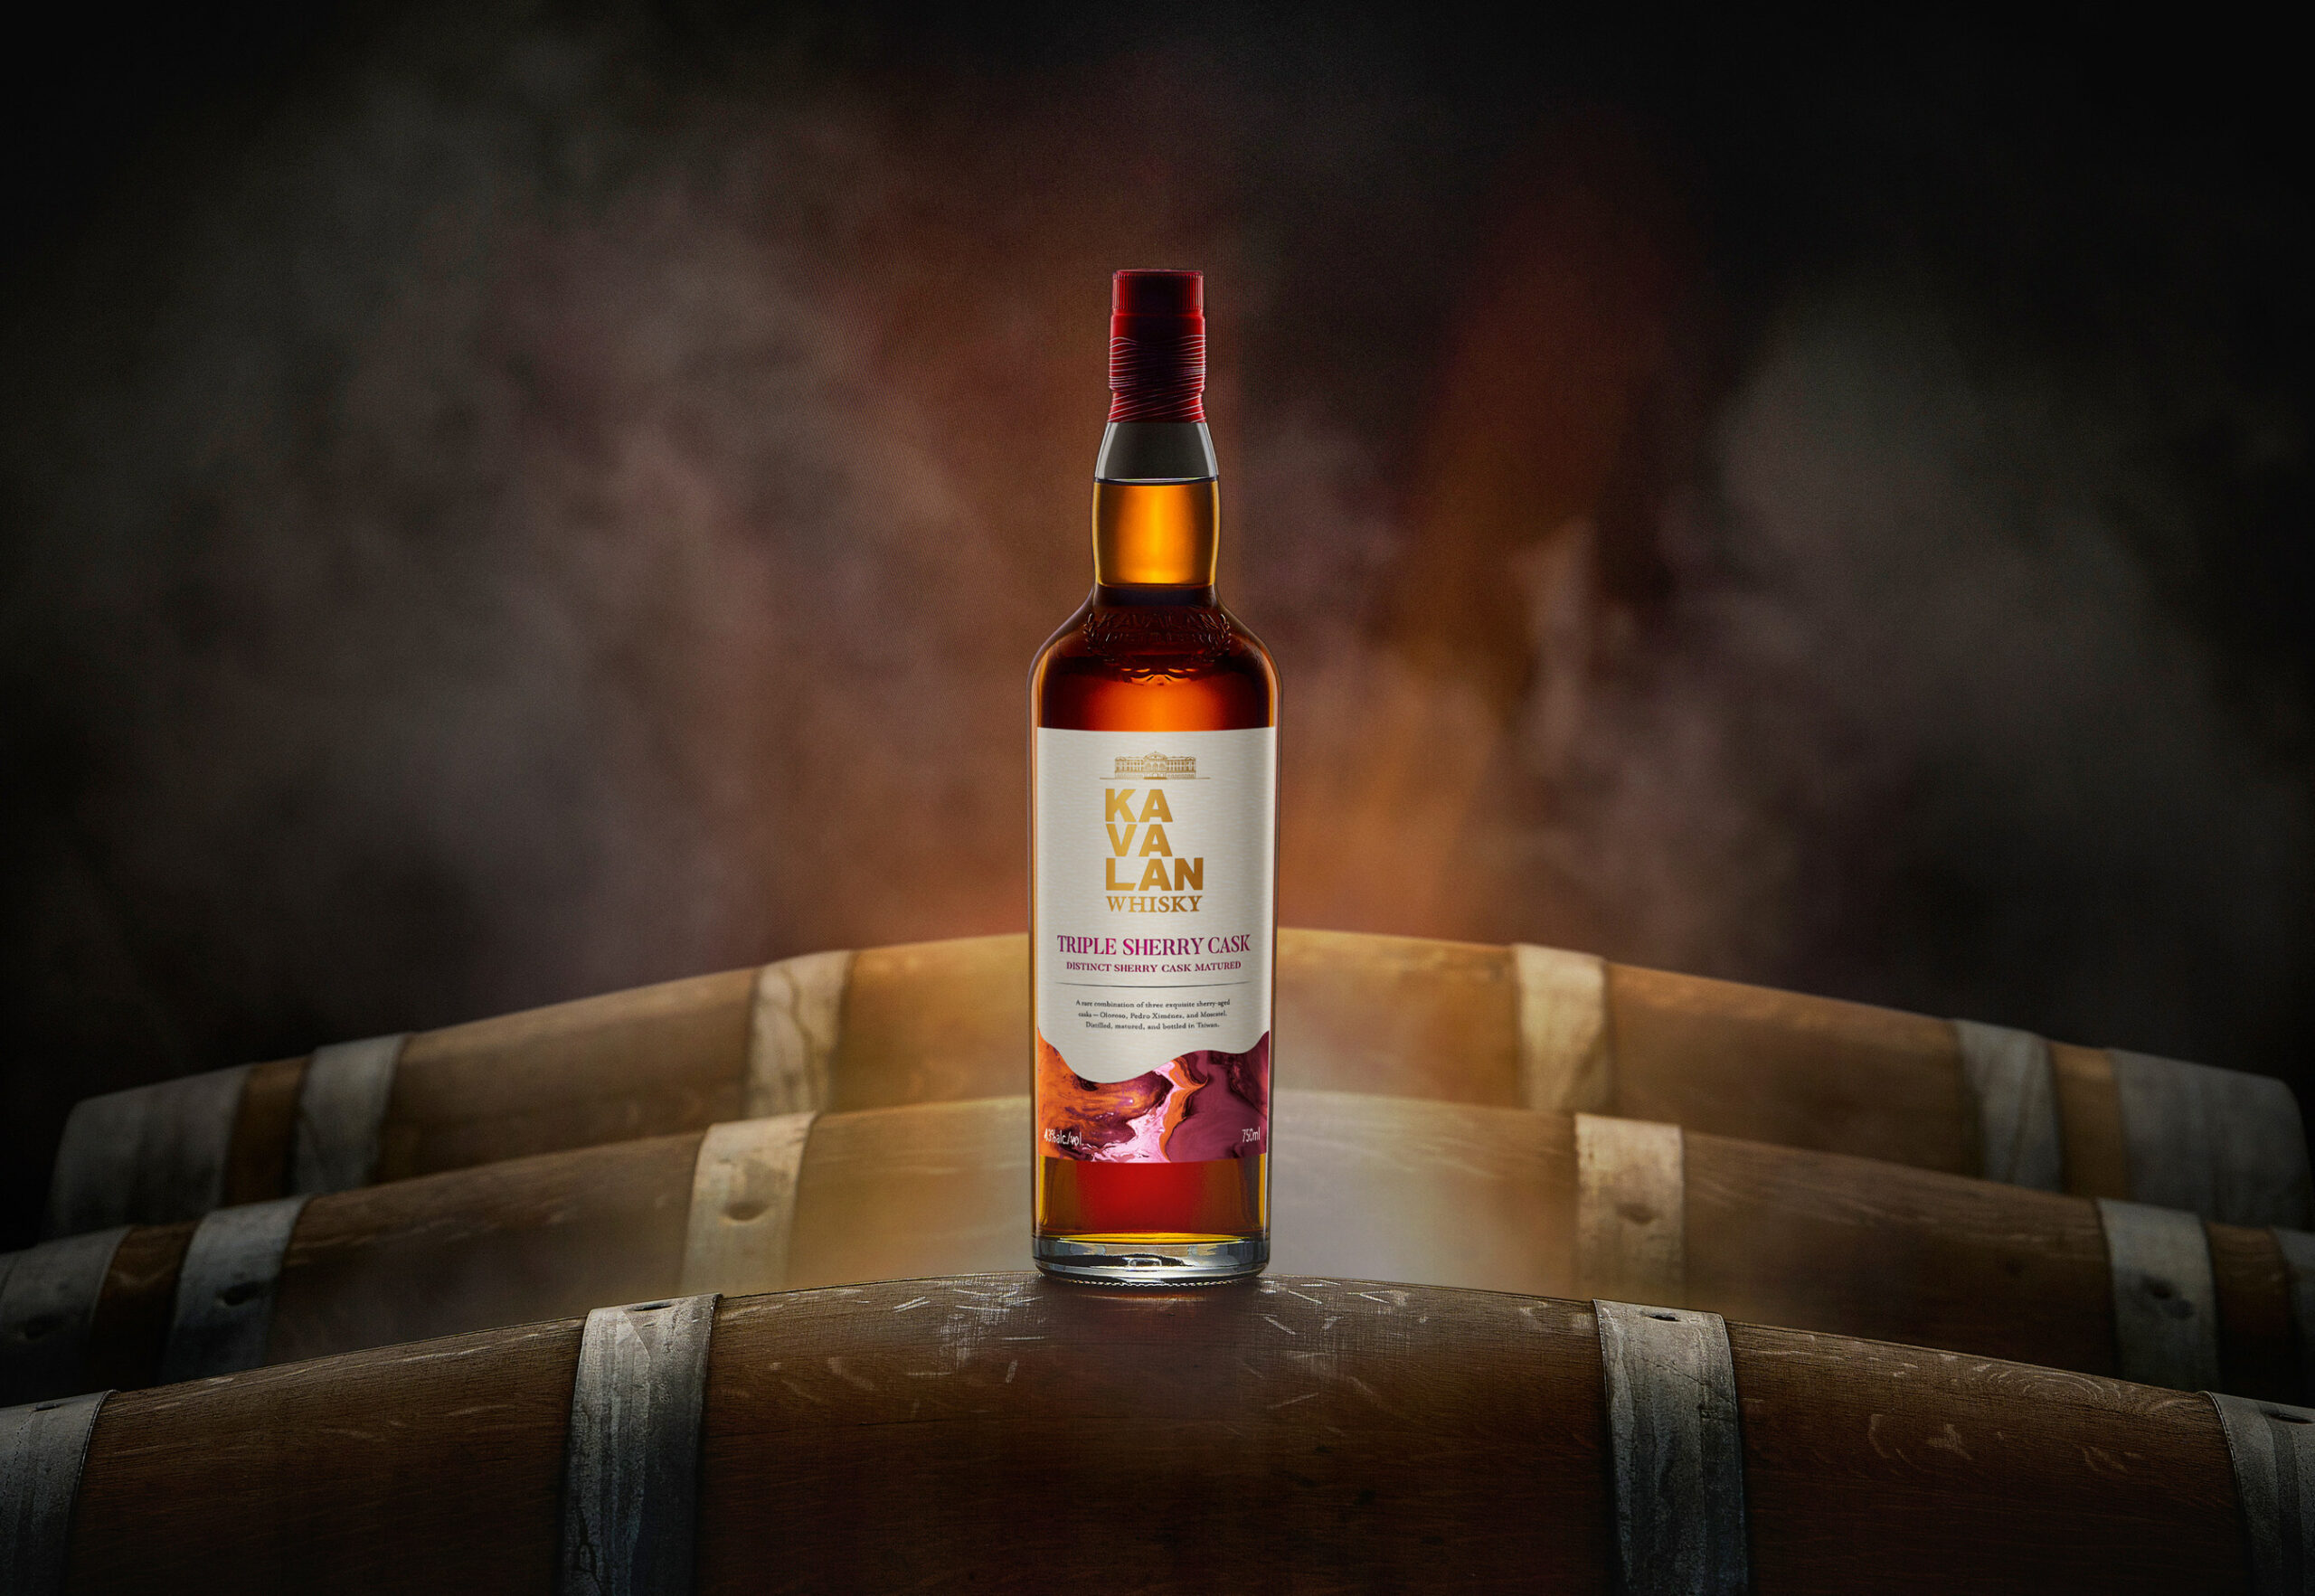 Kavalan Announces New Triple Sherry Cask Whisky Launch in U.S.